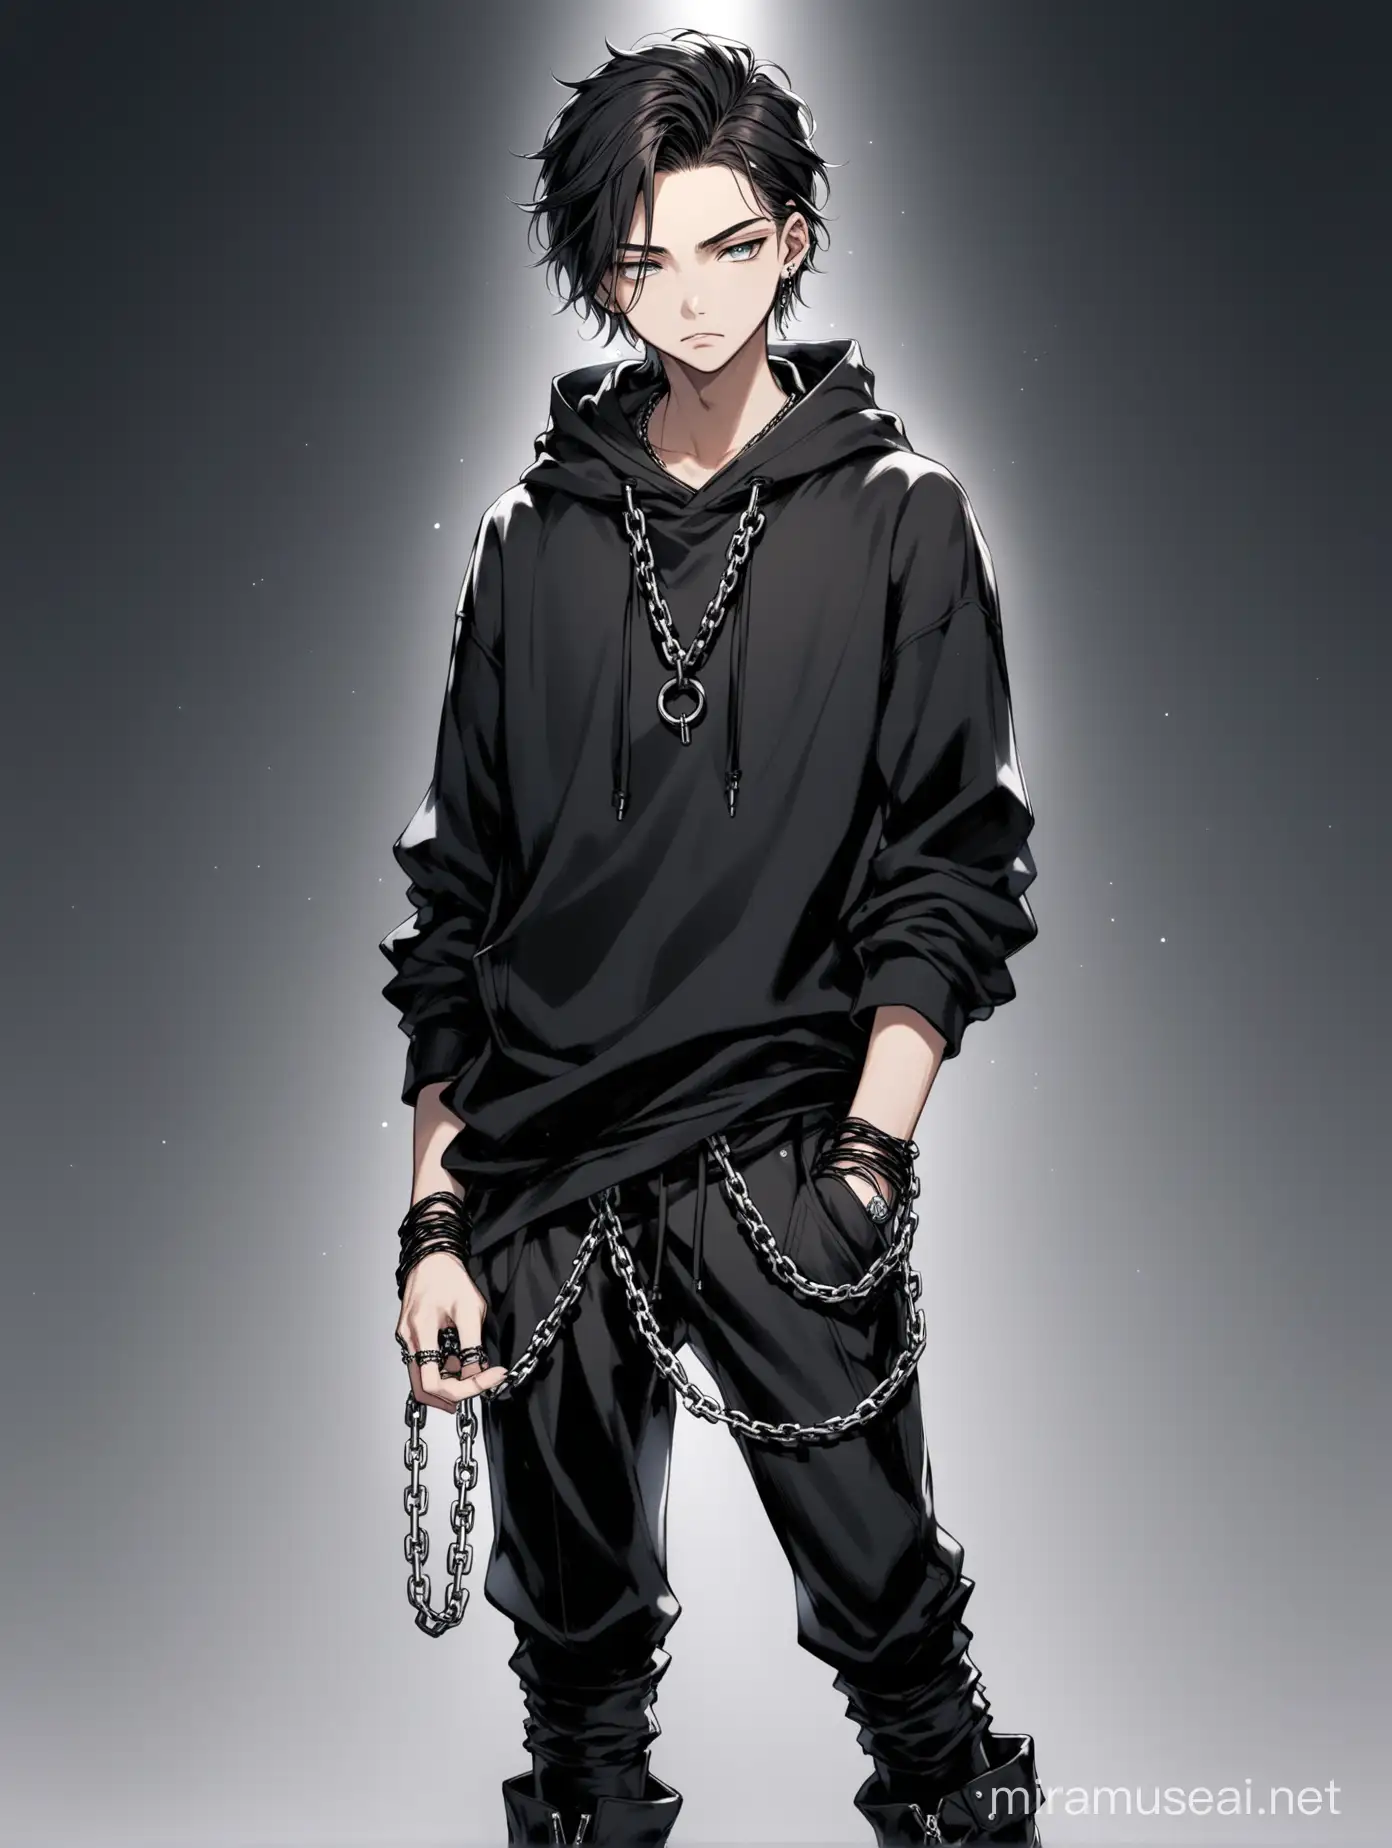 Stylish Teenage Boy with Dark Aesthetic Fashion and Accessories